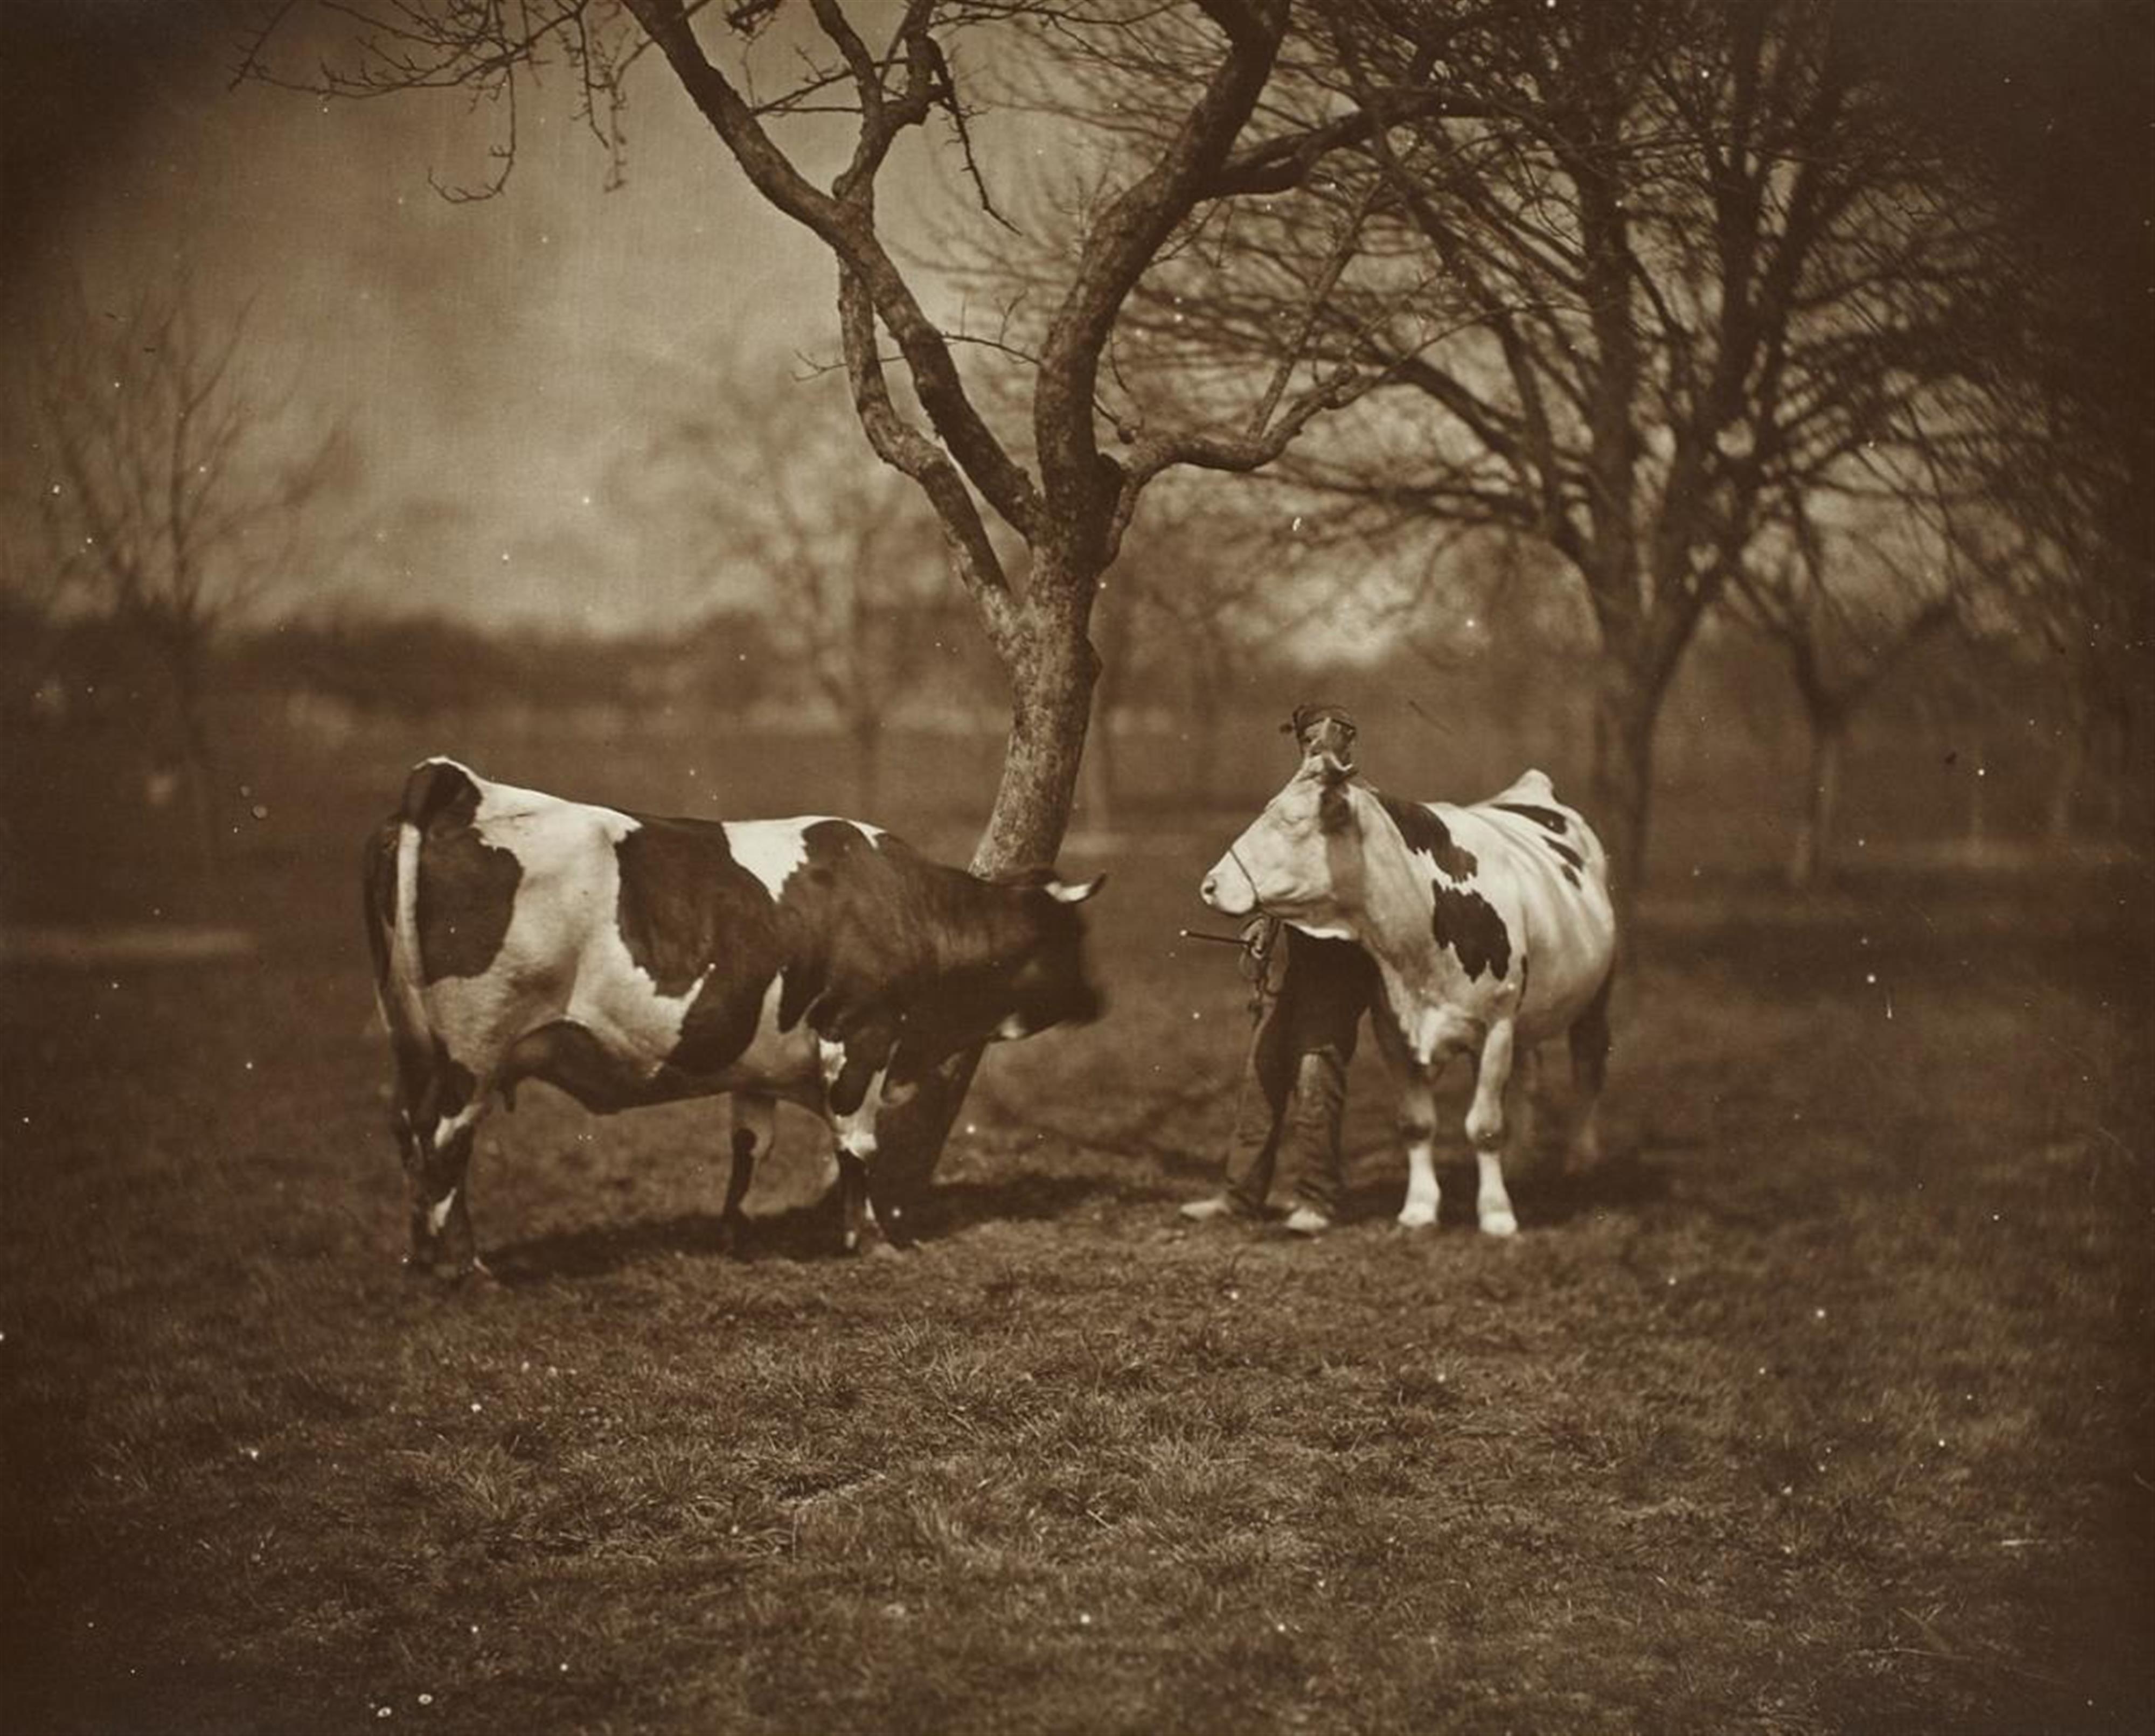 Adolphe Braun - Untitled (from the series: Animaux de ferme) - image-3